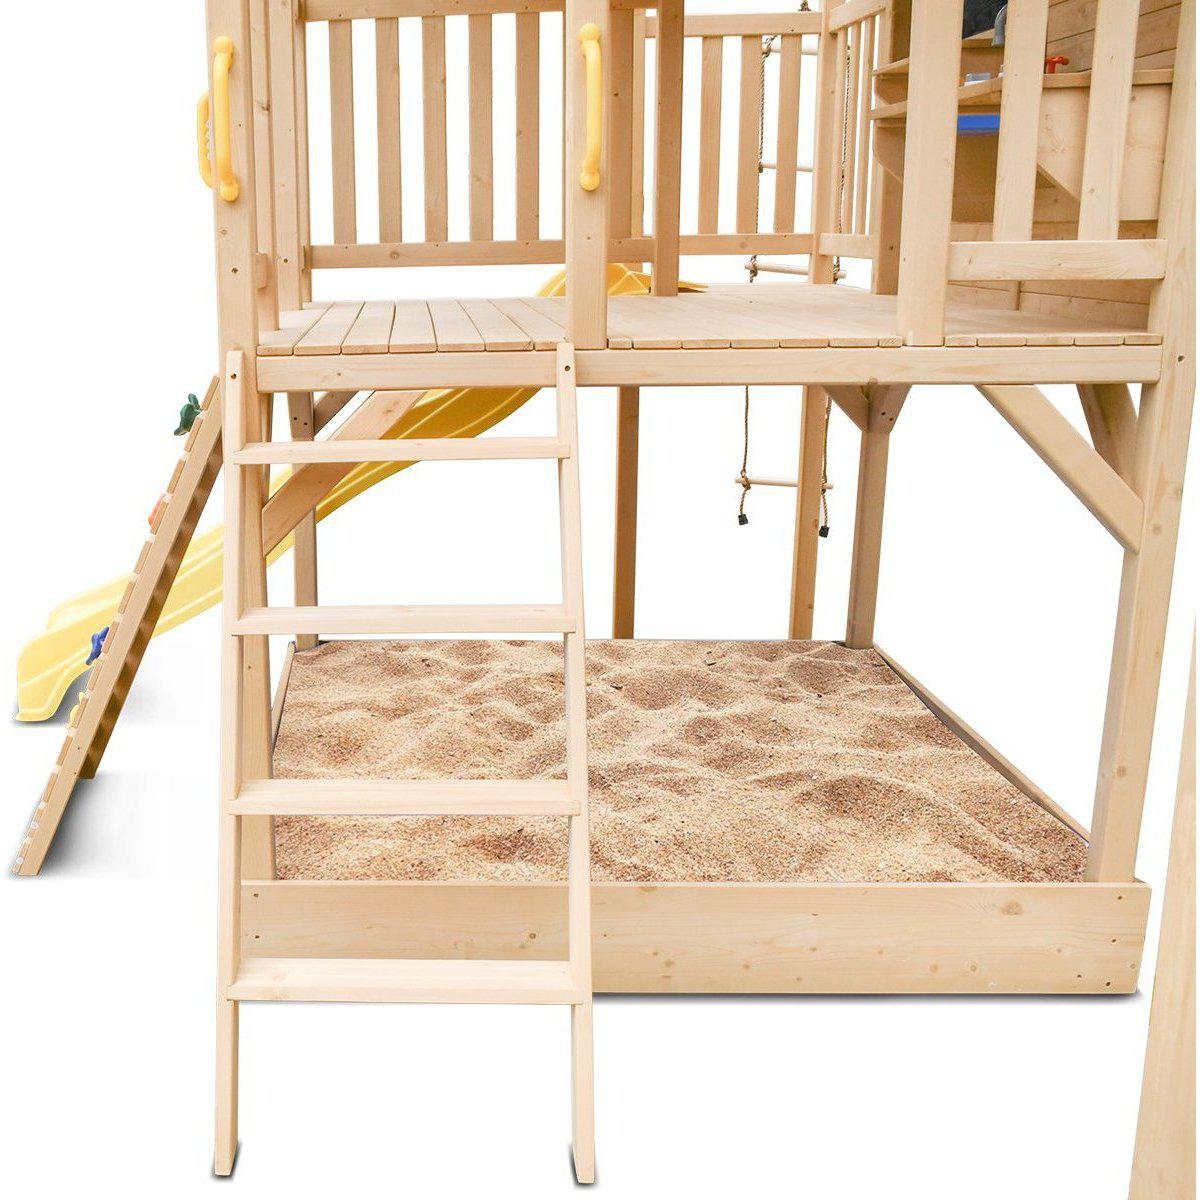 Elevate Backyard Play: Kingston Cubby House with Yellow Slide